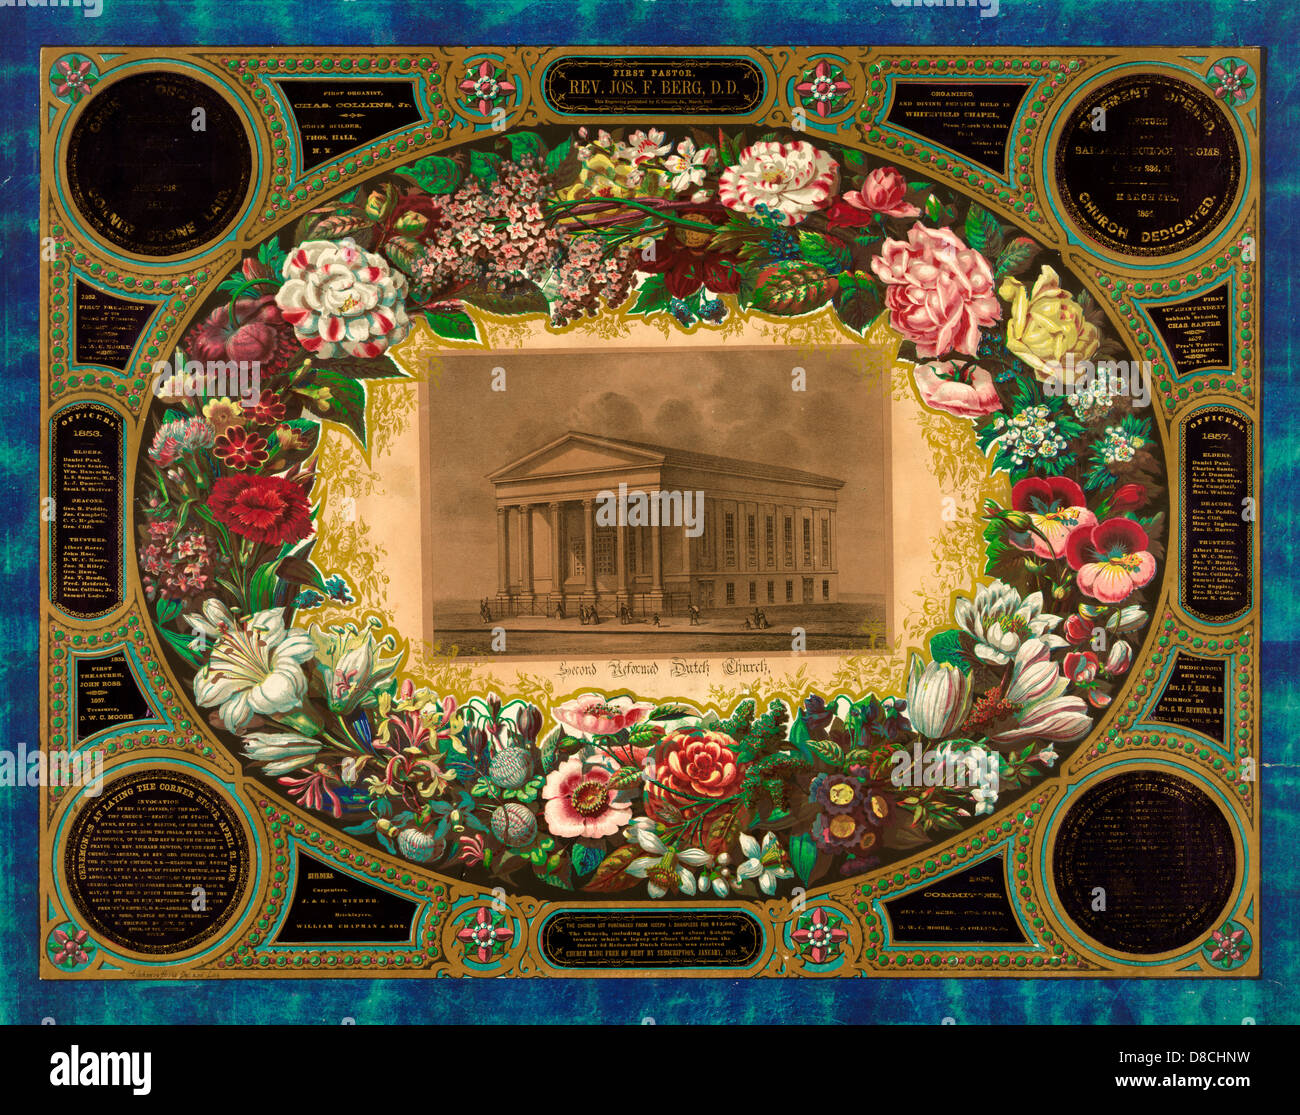 Second reformed Dutch church - exterior view of the Second Reformed Dutch Church at center within a floral wreath and elaborate border with spaces for separately printed and mounted cut-outs containing text presenting the history of the church, circa 1857 Stock Photo